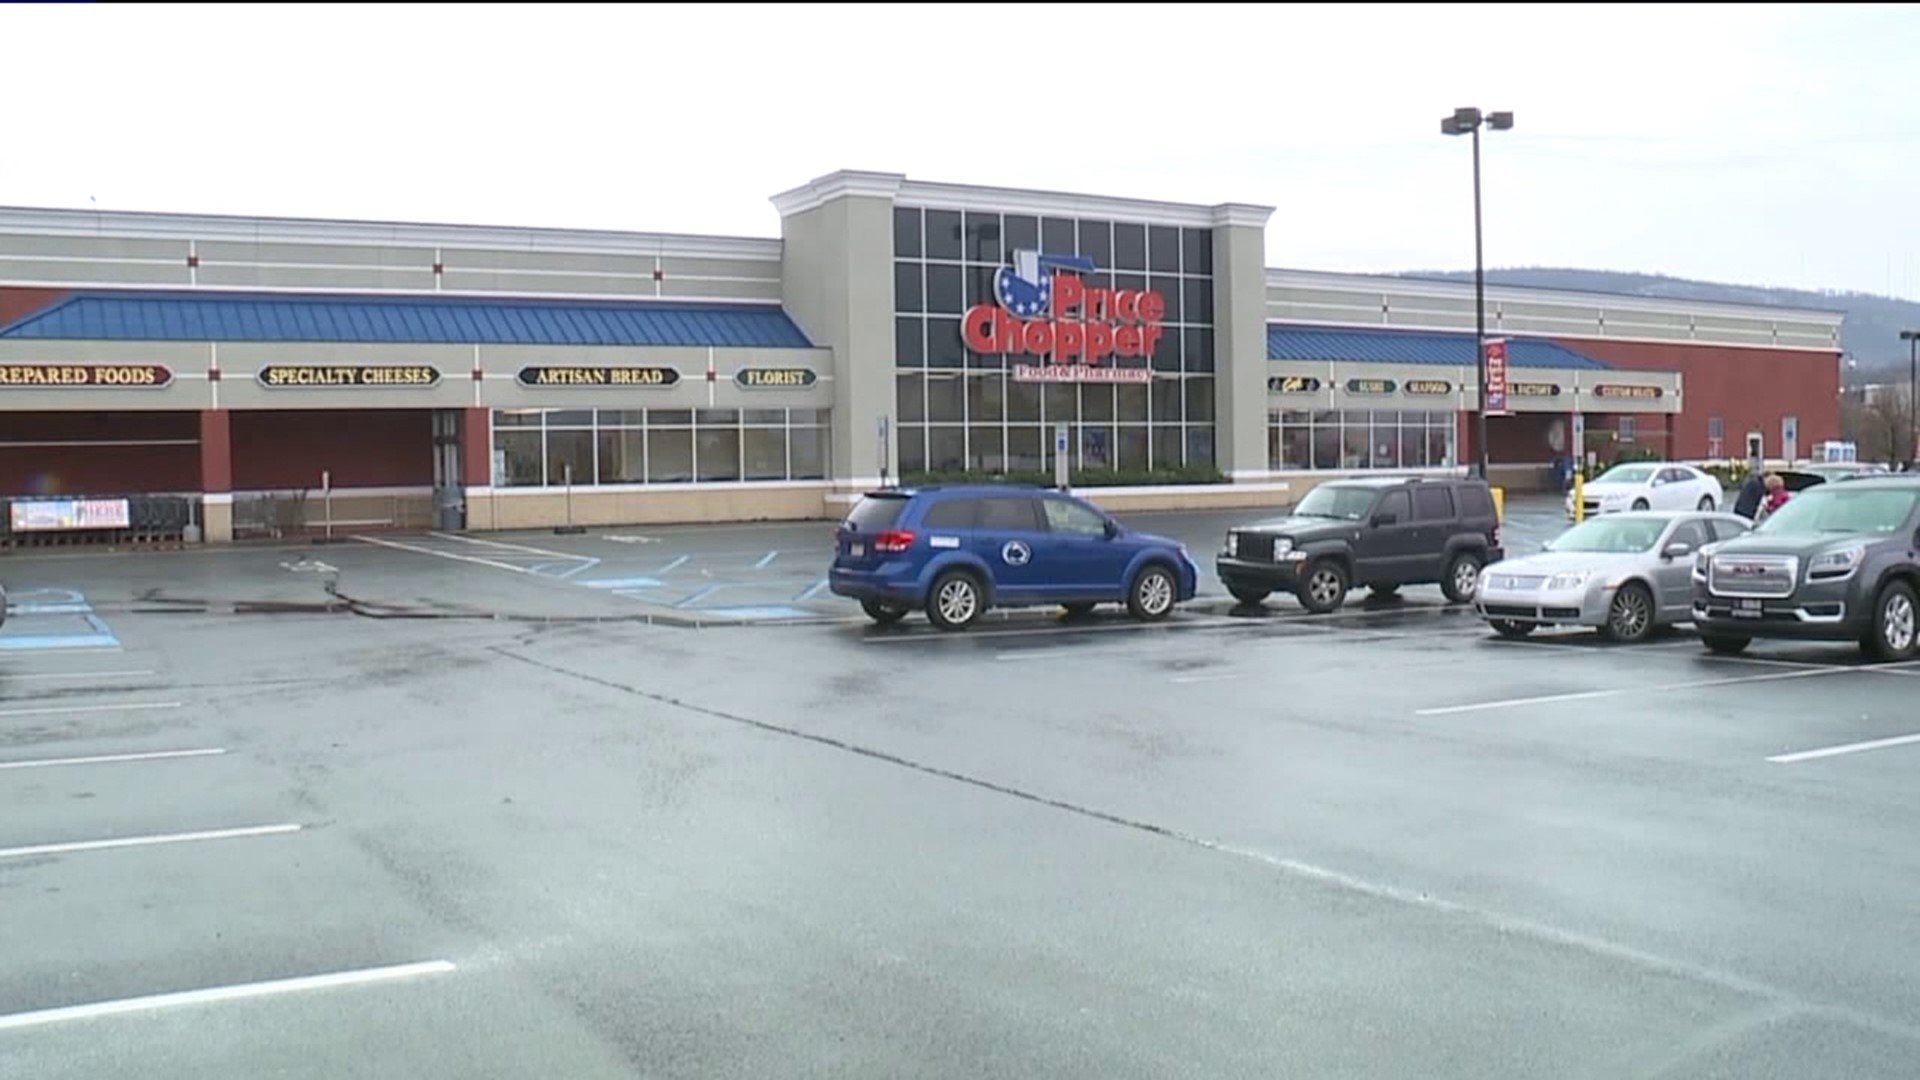 The Price Chopper in Taylor will close permanently on Saturday, April 19th.